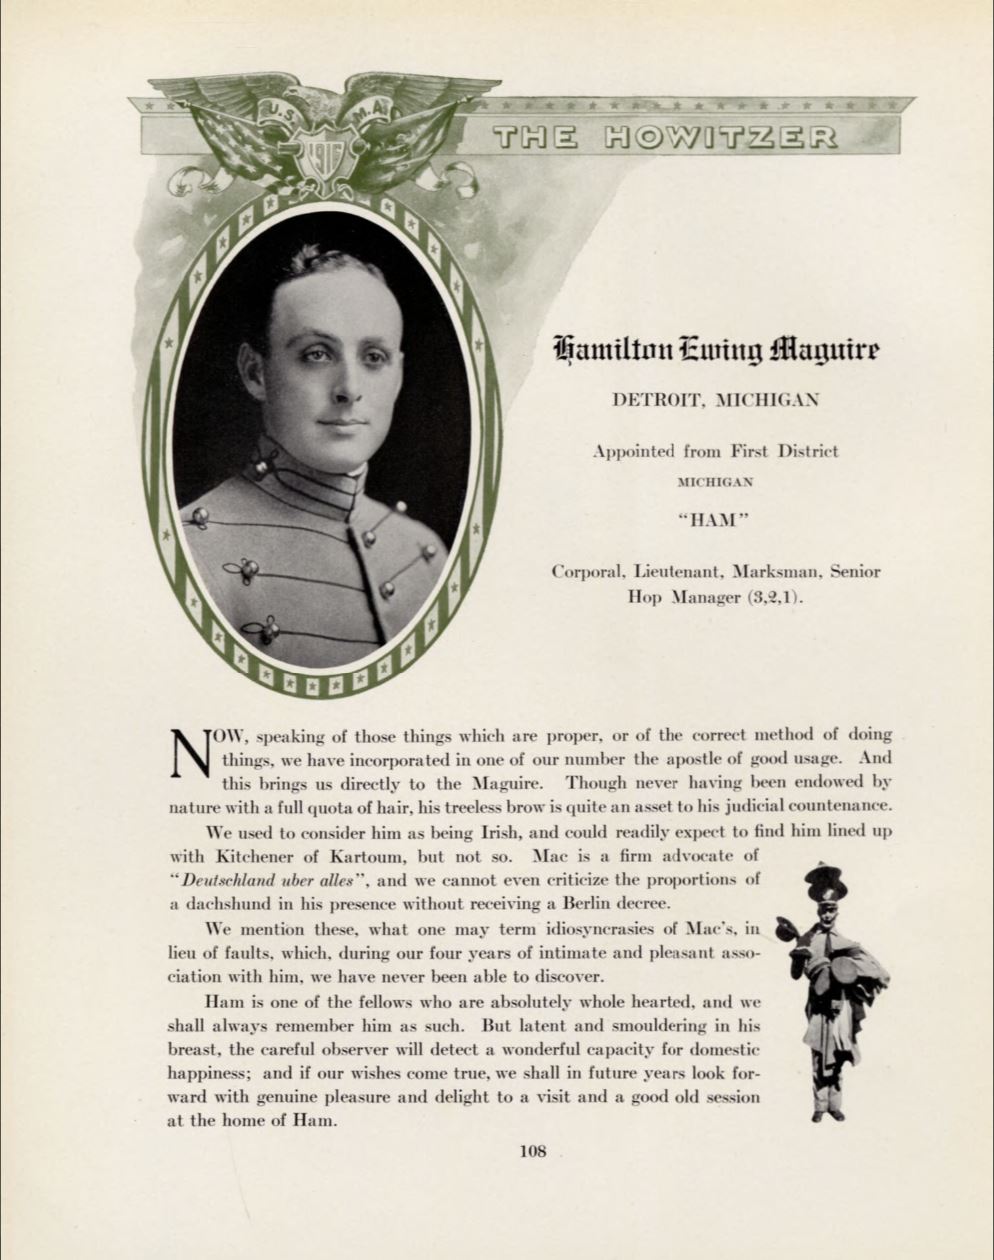 Hamilton Ewing Maguire, USMA Howitzer Yearbook, West point class of 1916